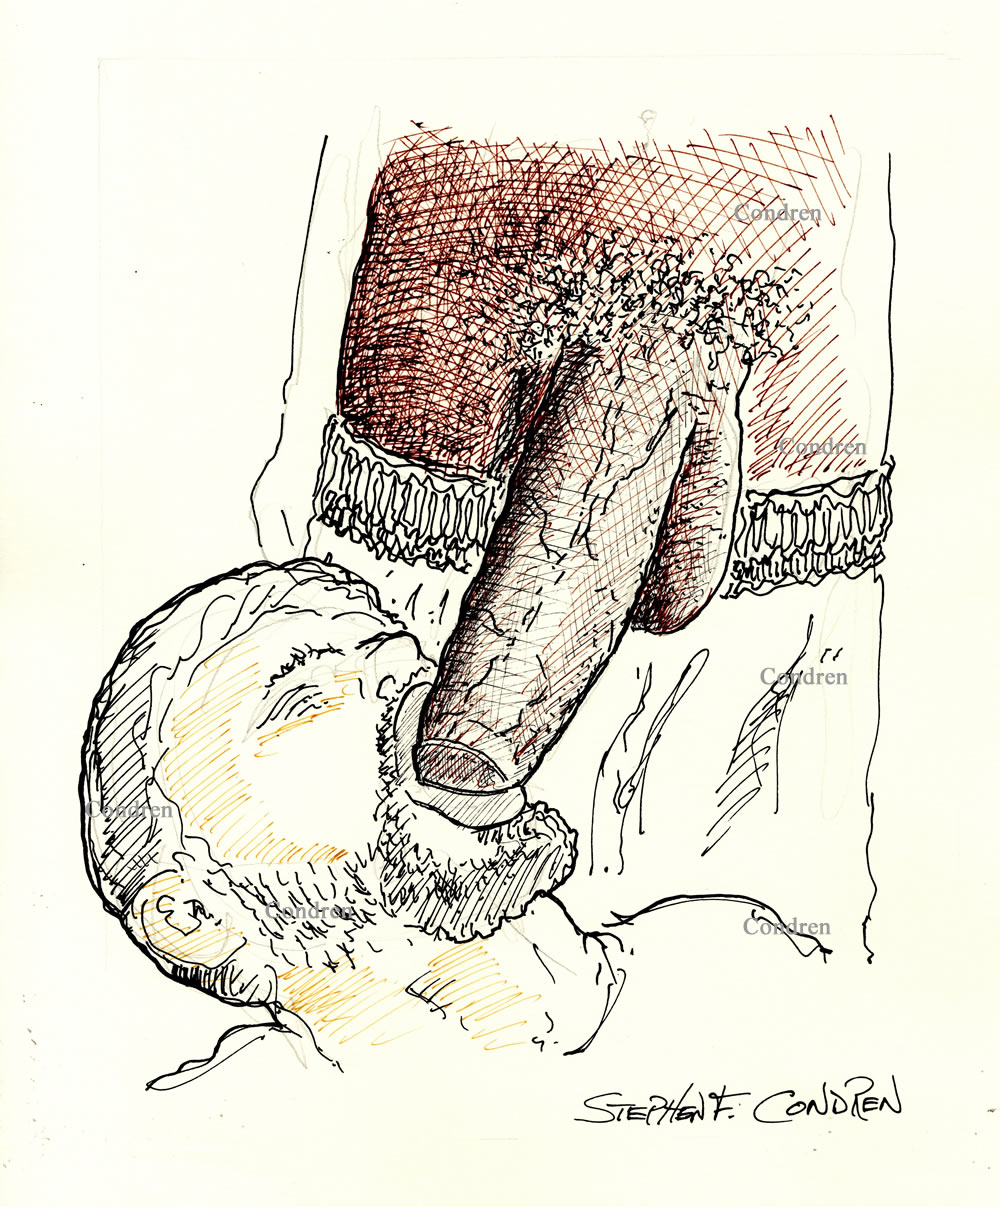 Pen & ink drawing of a boy sucking a big black dick (BBC). The penis is so large that the boy cannot fit it in his mouth.